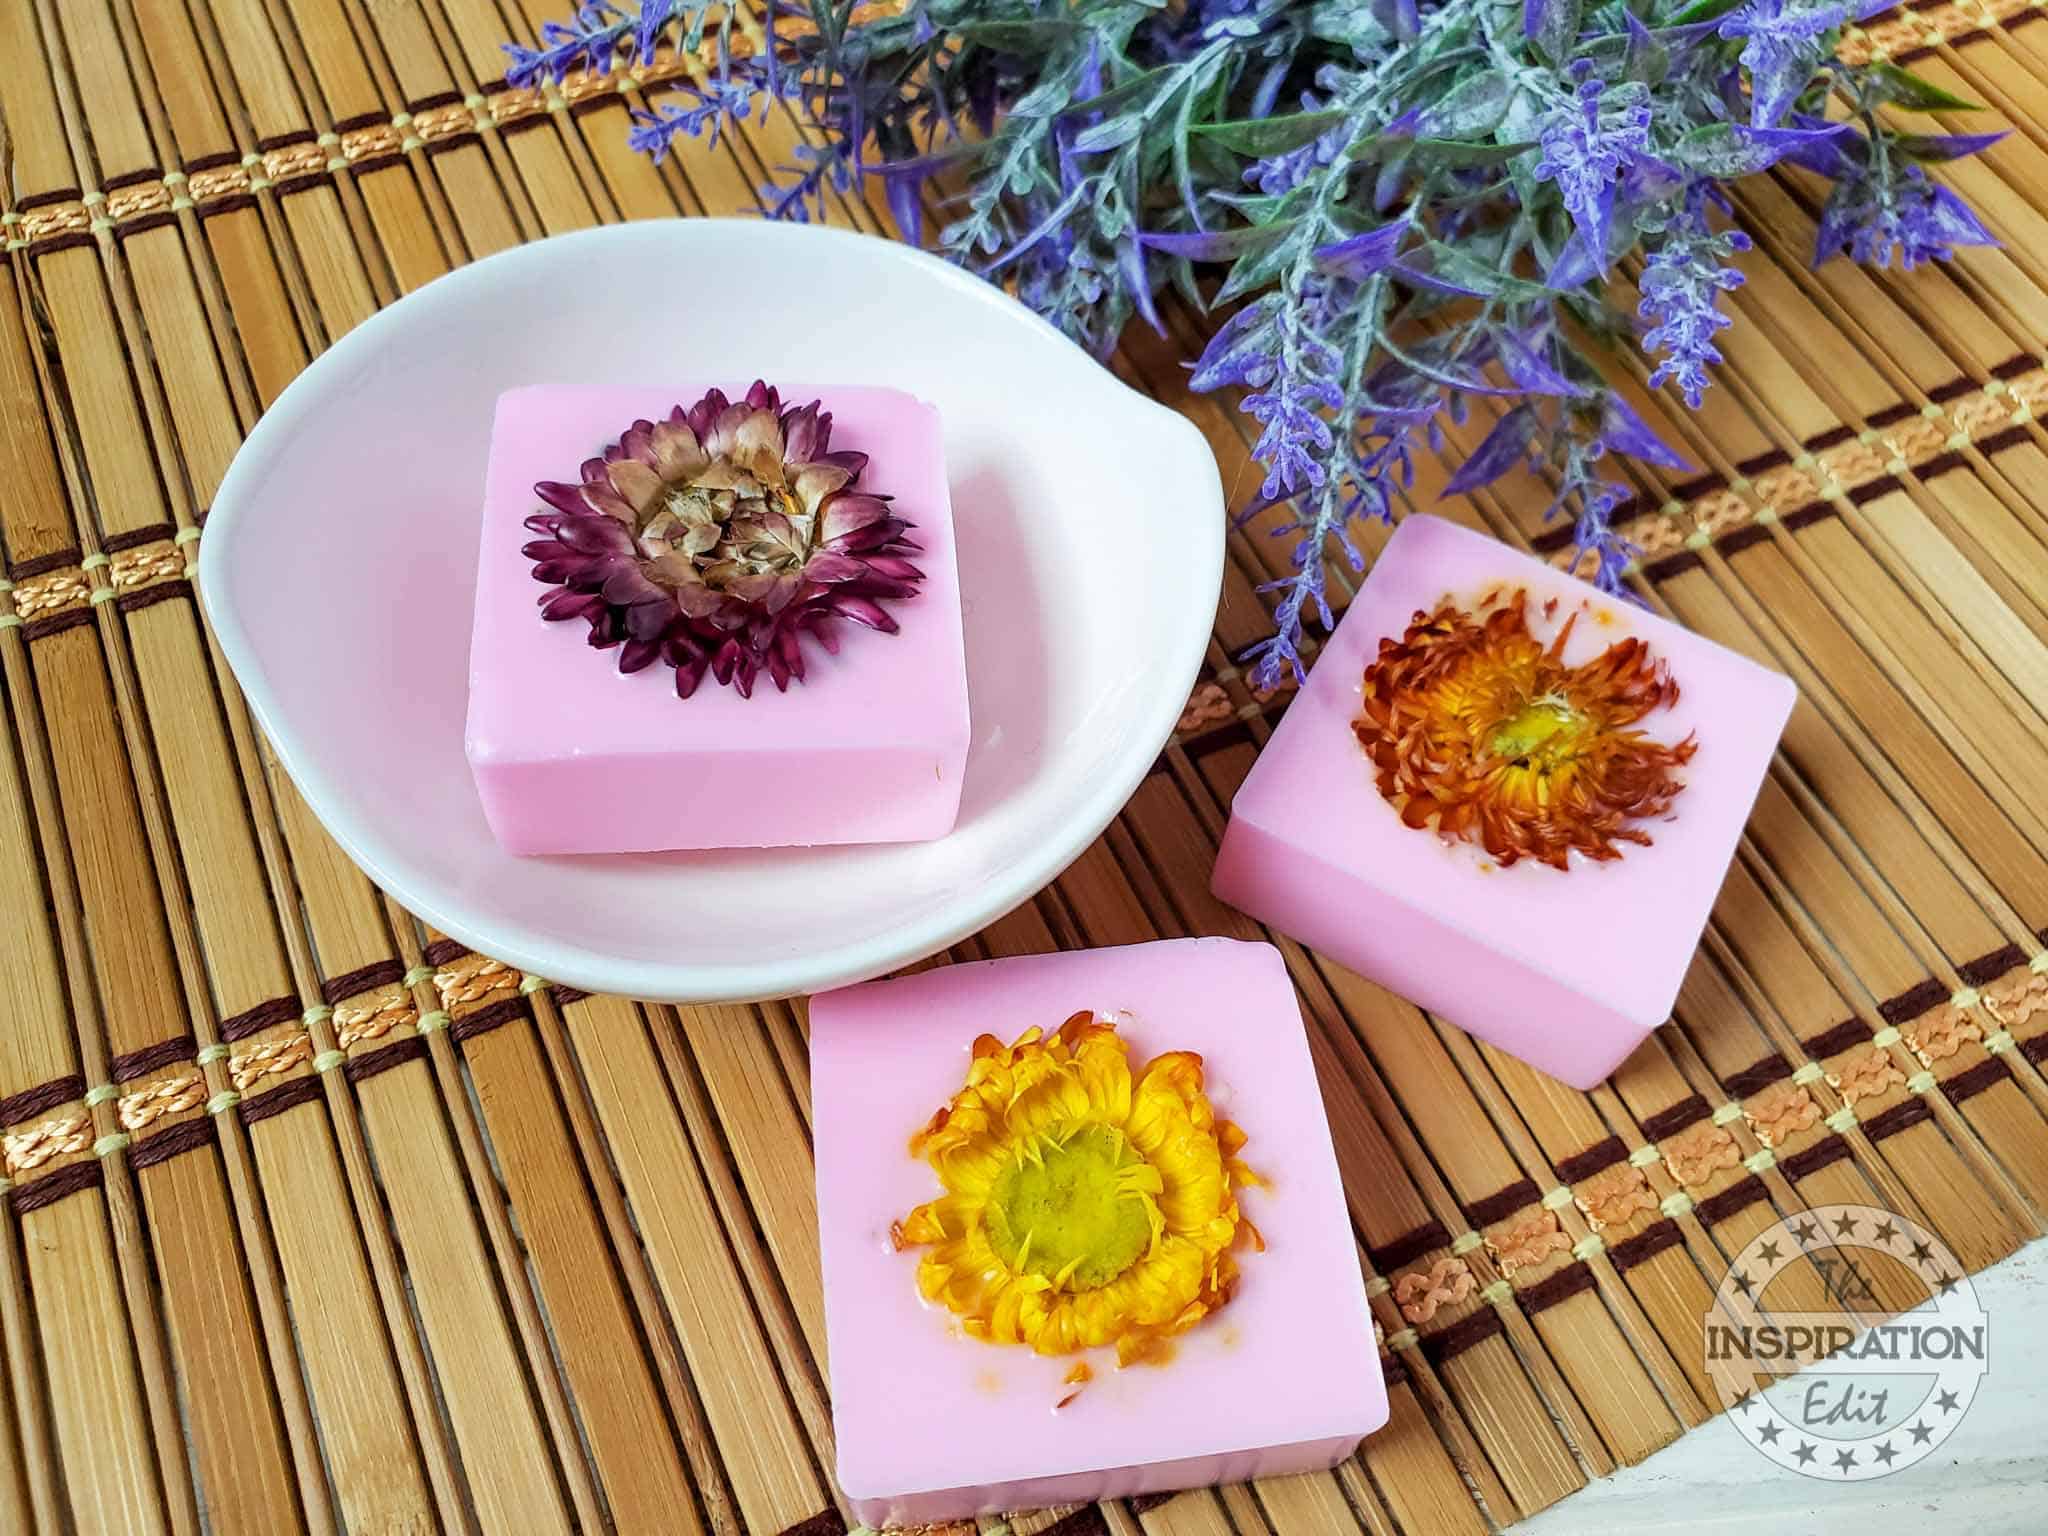 Homemade Soaps With Dried Chrysanthemum Flowers And Violet Fragrance